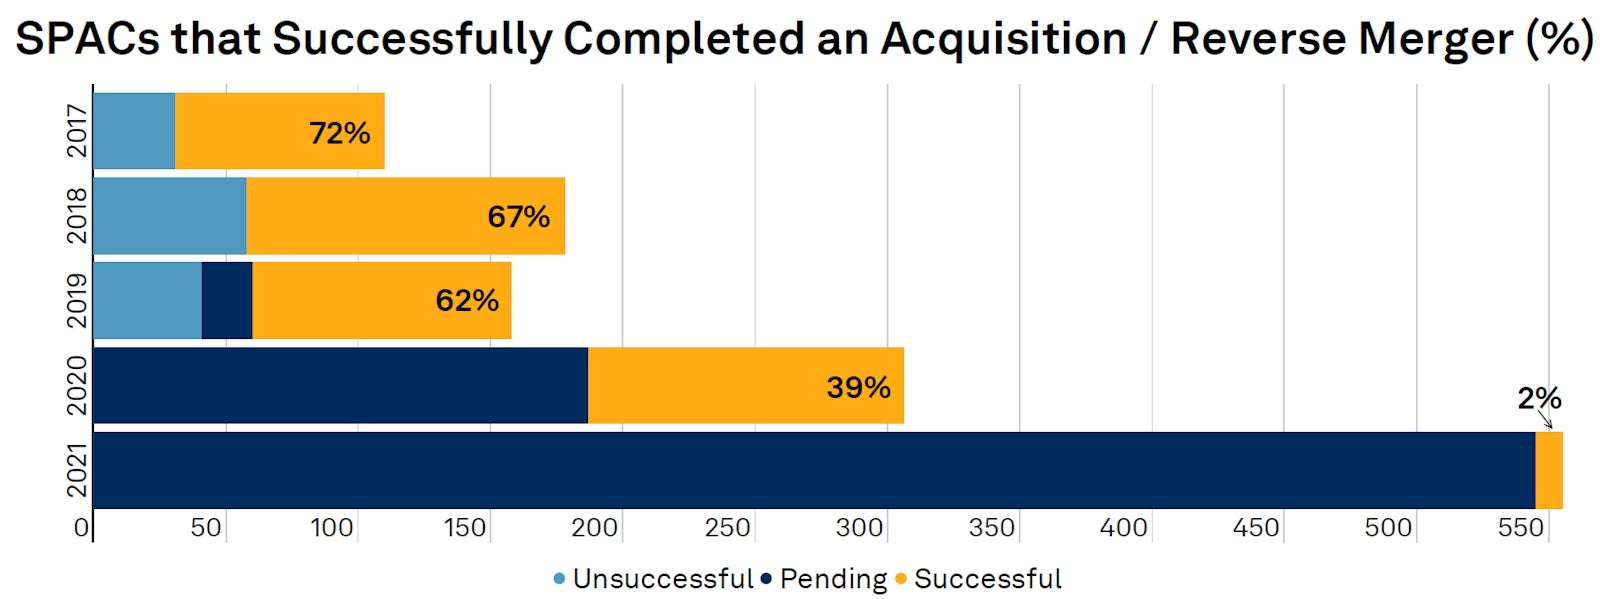 Very few SPACs have successfully completed an acquisition this year | Source: S&P Capital IQ